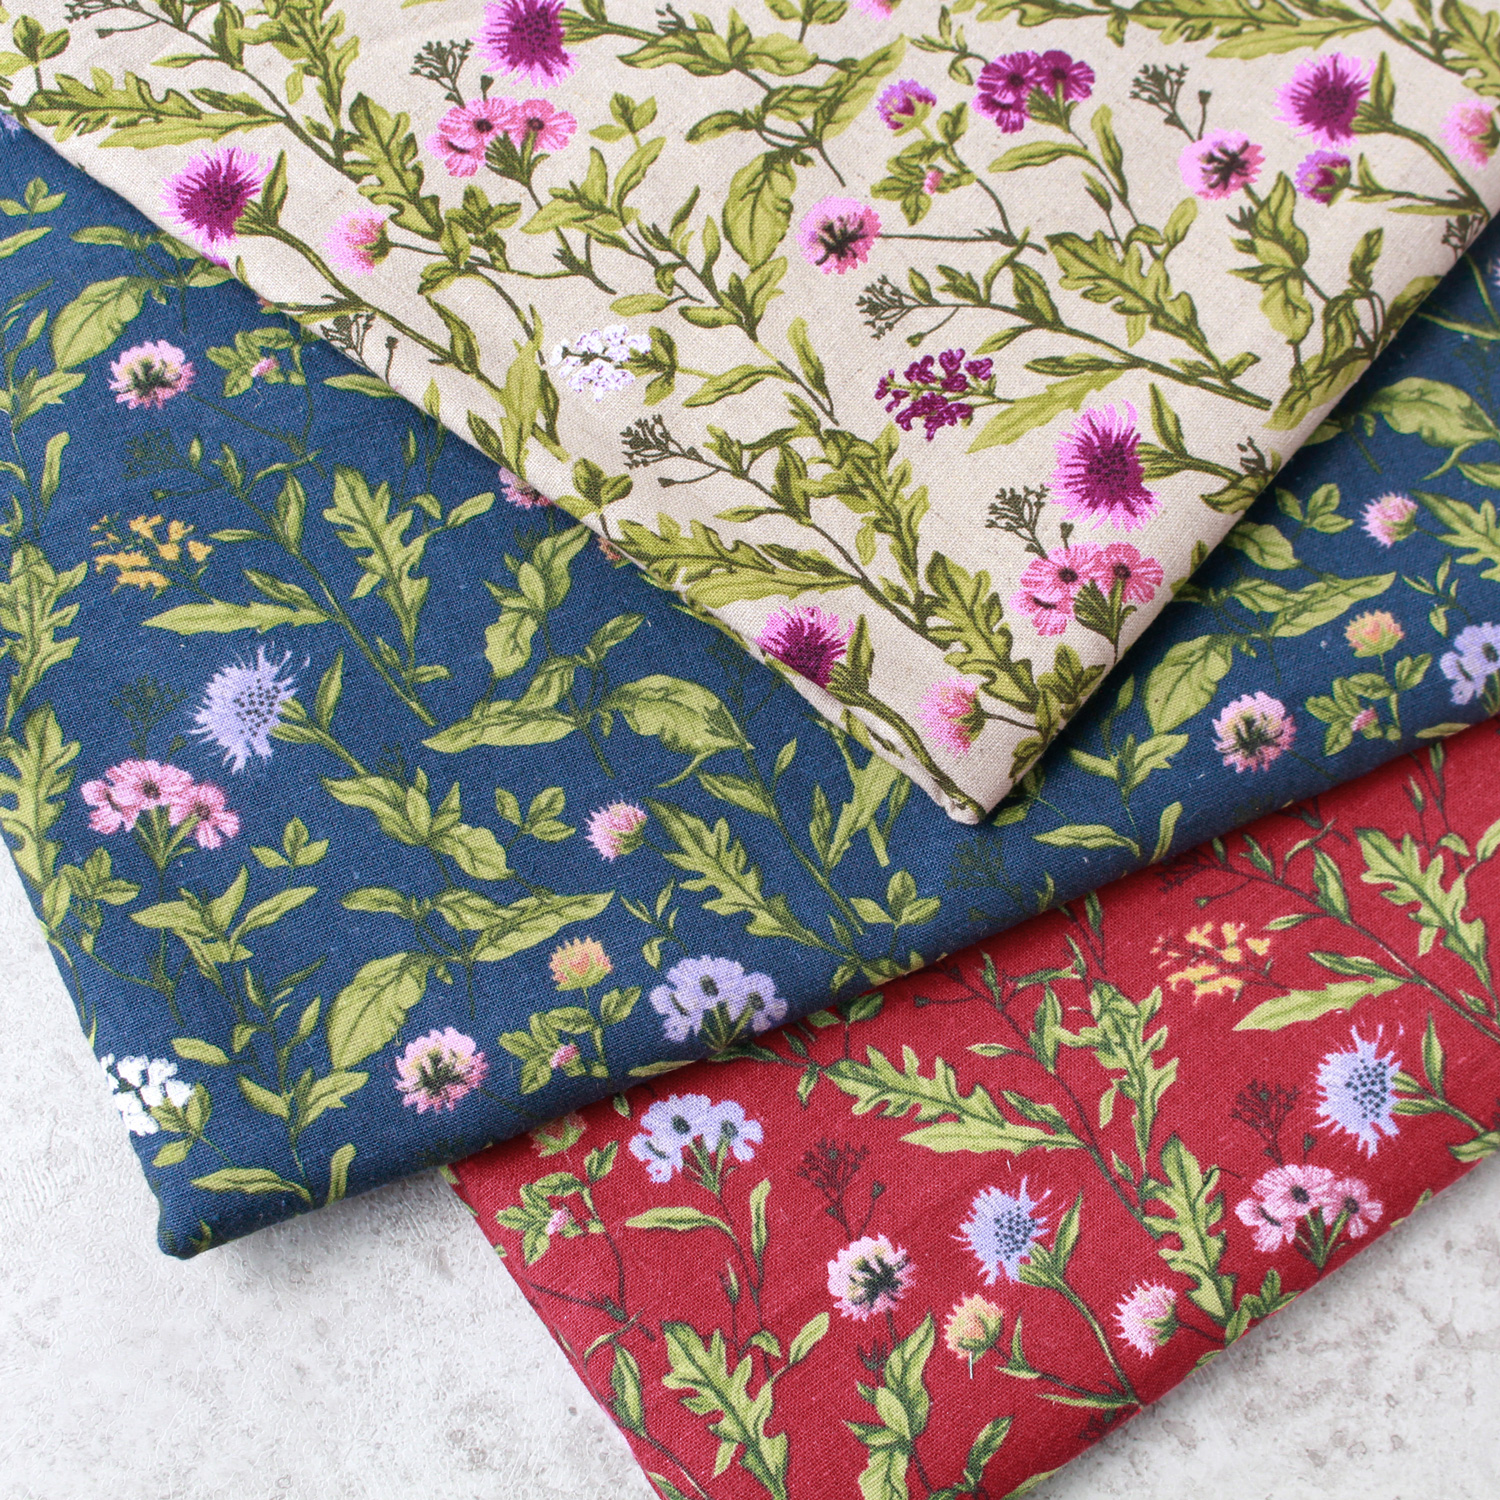 ■Z005919R Pretty Plants Collection Cotton&Linen Fabric width140cm 11m roll（roll）